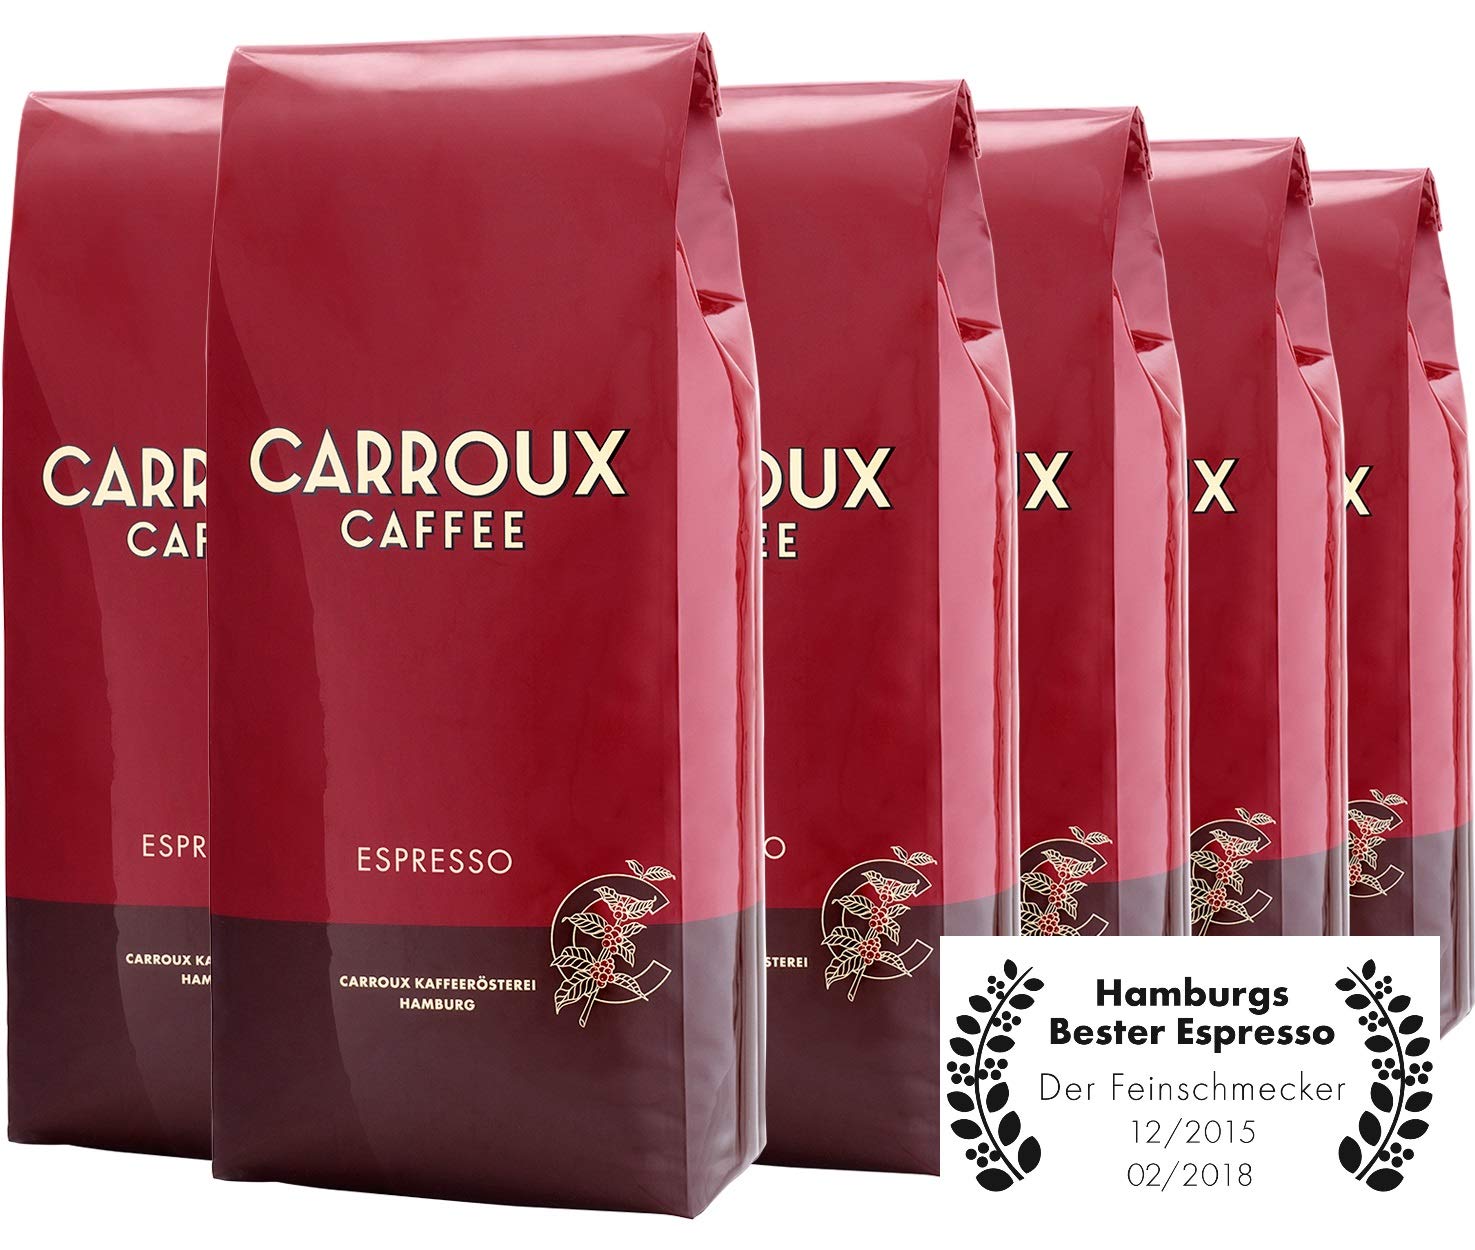 CARROUX Espresso, Whole Beans (6 x 500 g). For Portafilters and Fully Automatic Coffee Machines. Freshly Roasted Coffee Beans from the Private Roastery from Hamburg